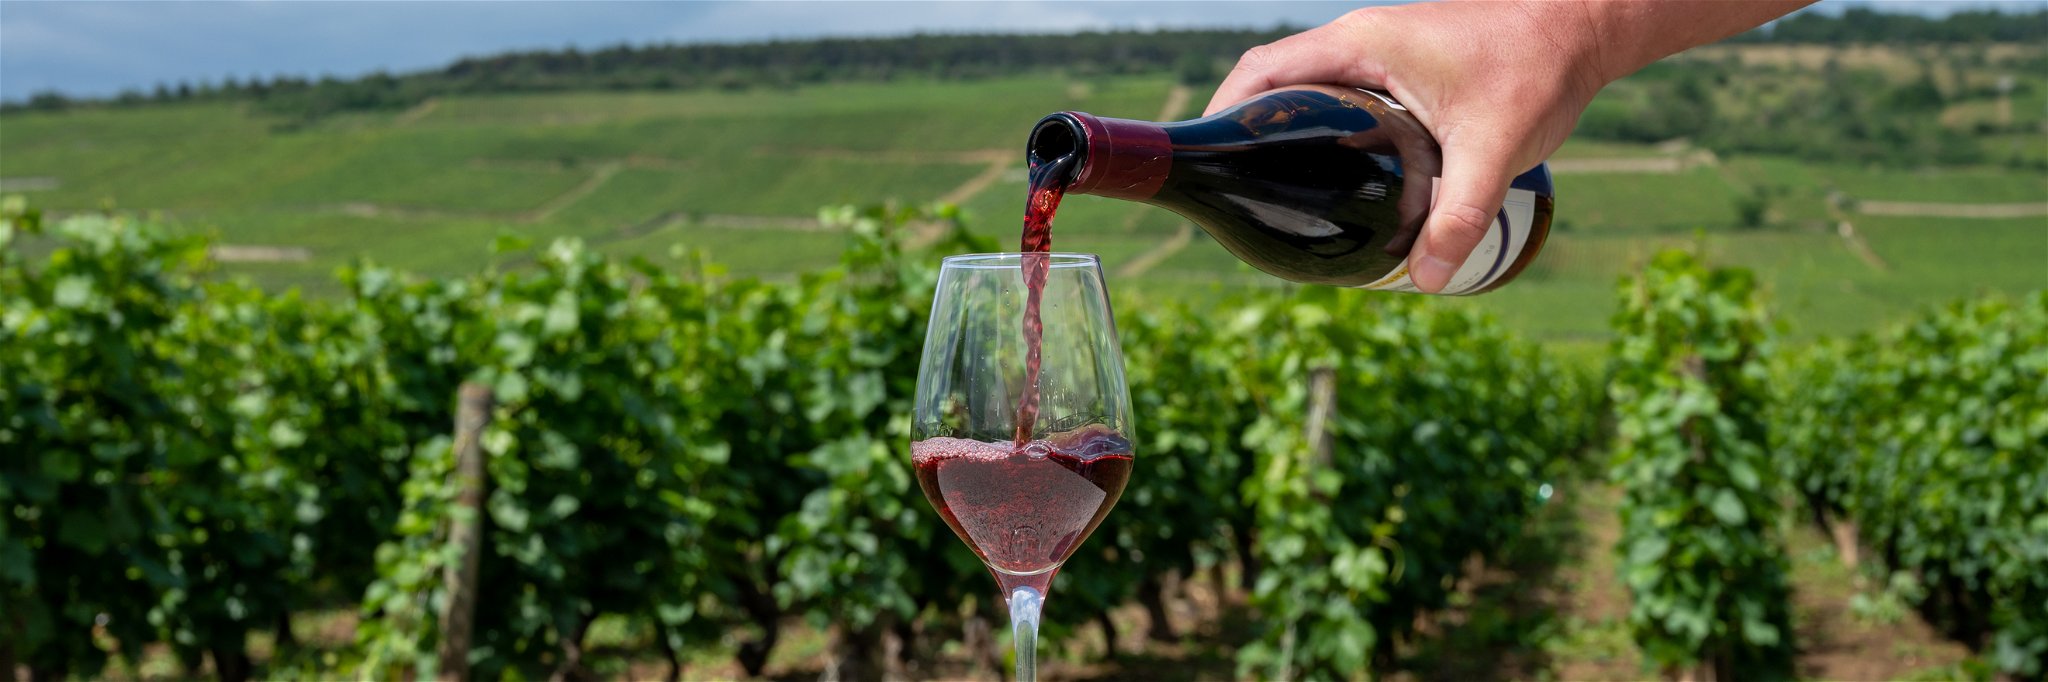 Pinot Noir has an alluring combination of delicacy and intensity but there are alternatives...